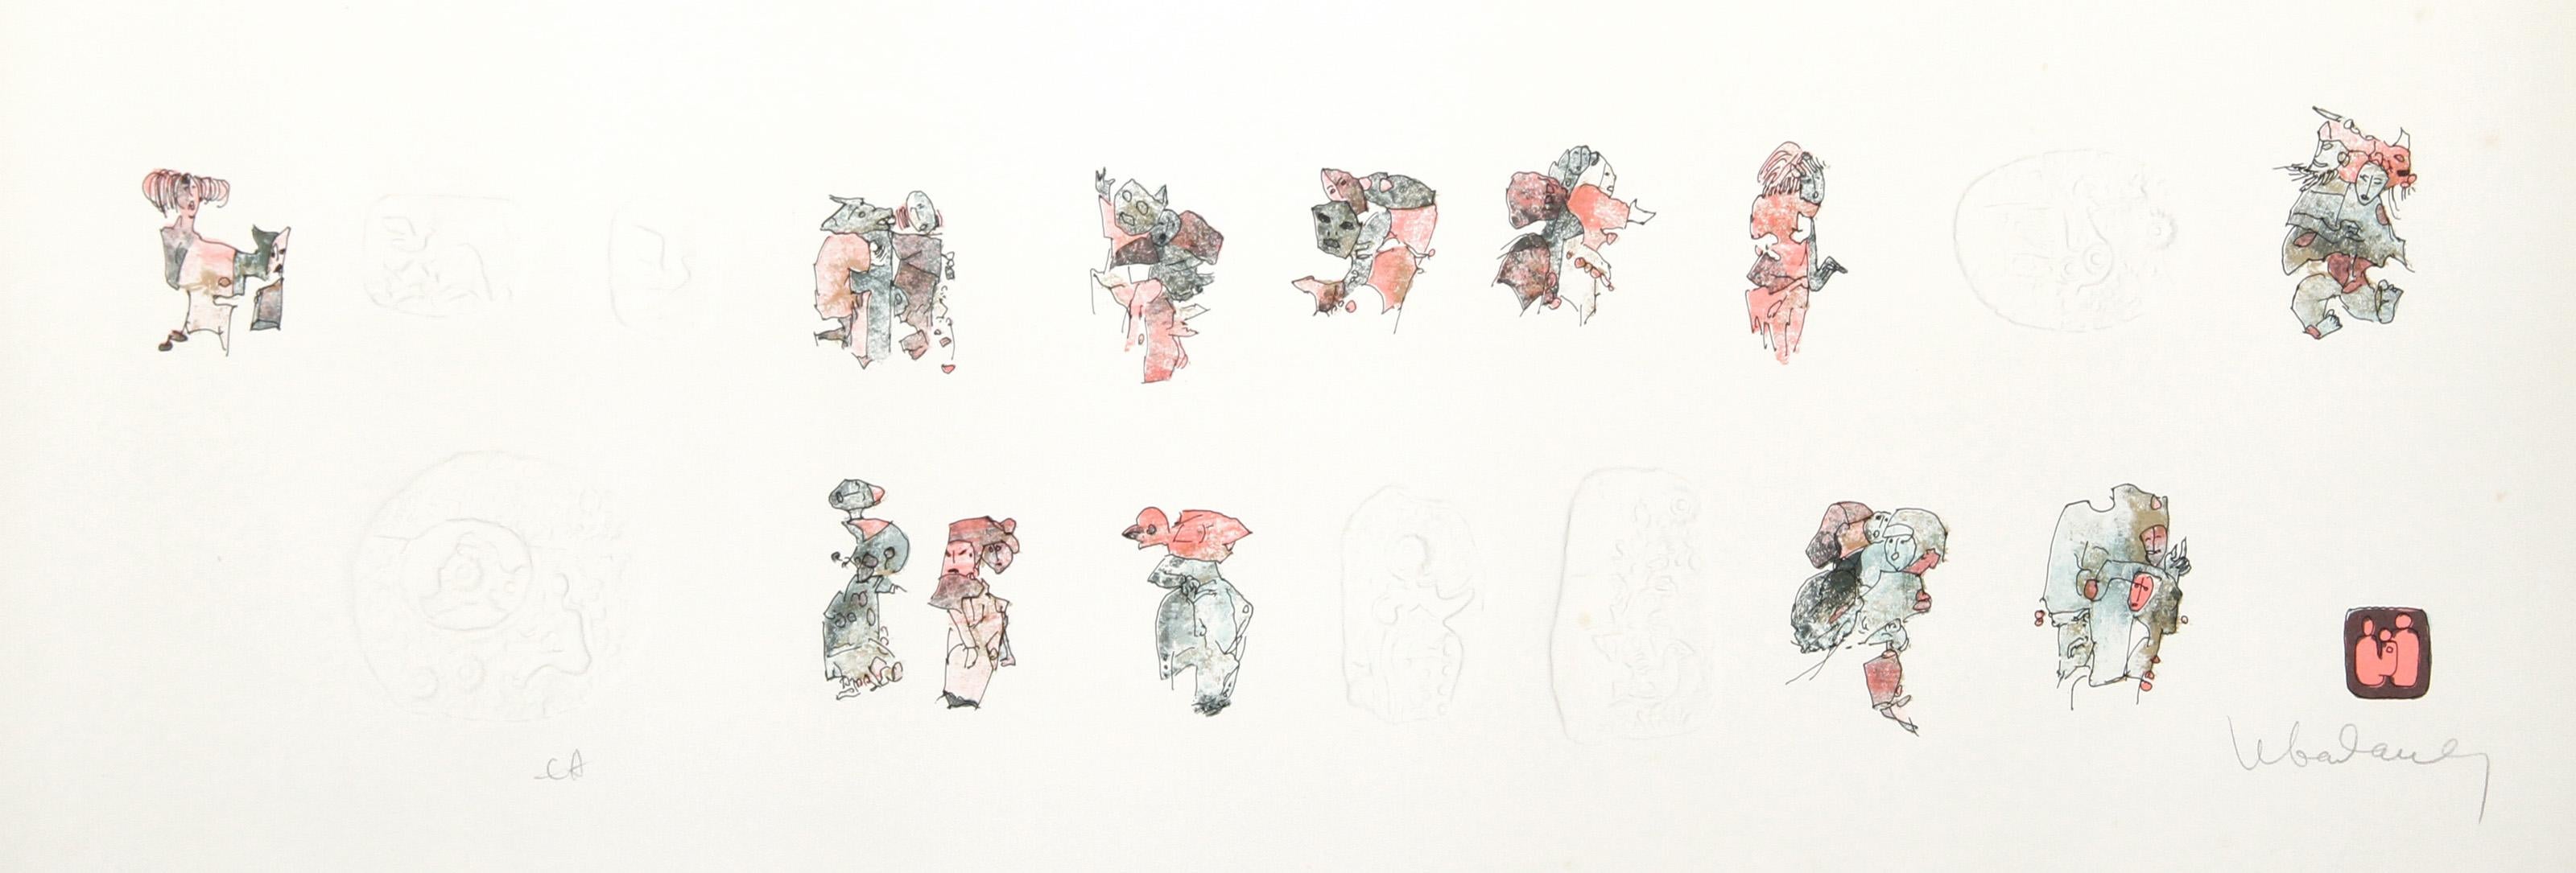 Lebadang (aka Hoi), Vietnamese (1922 - 2015) -  Untitled - Figure Studies II. Medium: Lithograph with Intaglio Etching, Signed in pencil, Edition: EA, Size: 12  x 34.5 in. (30.48  x 87.63 cm) 